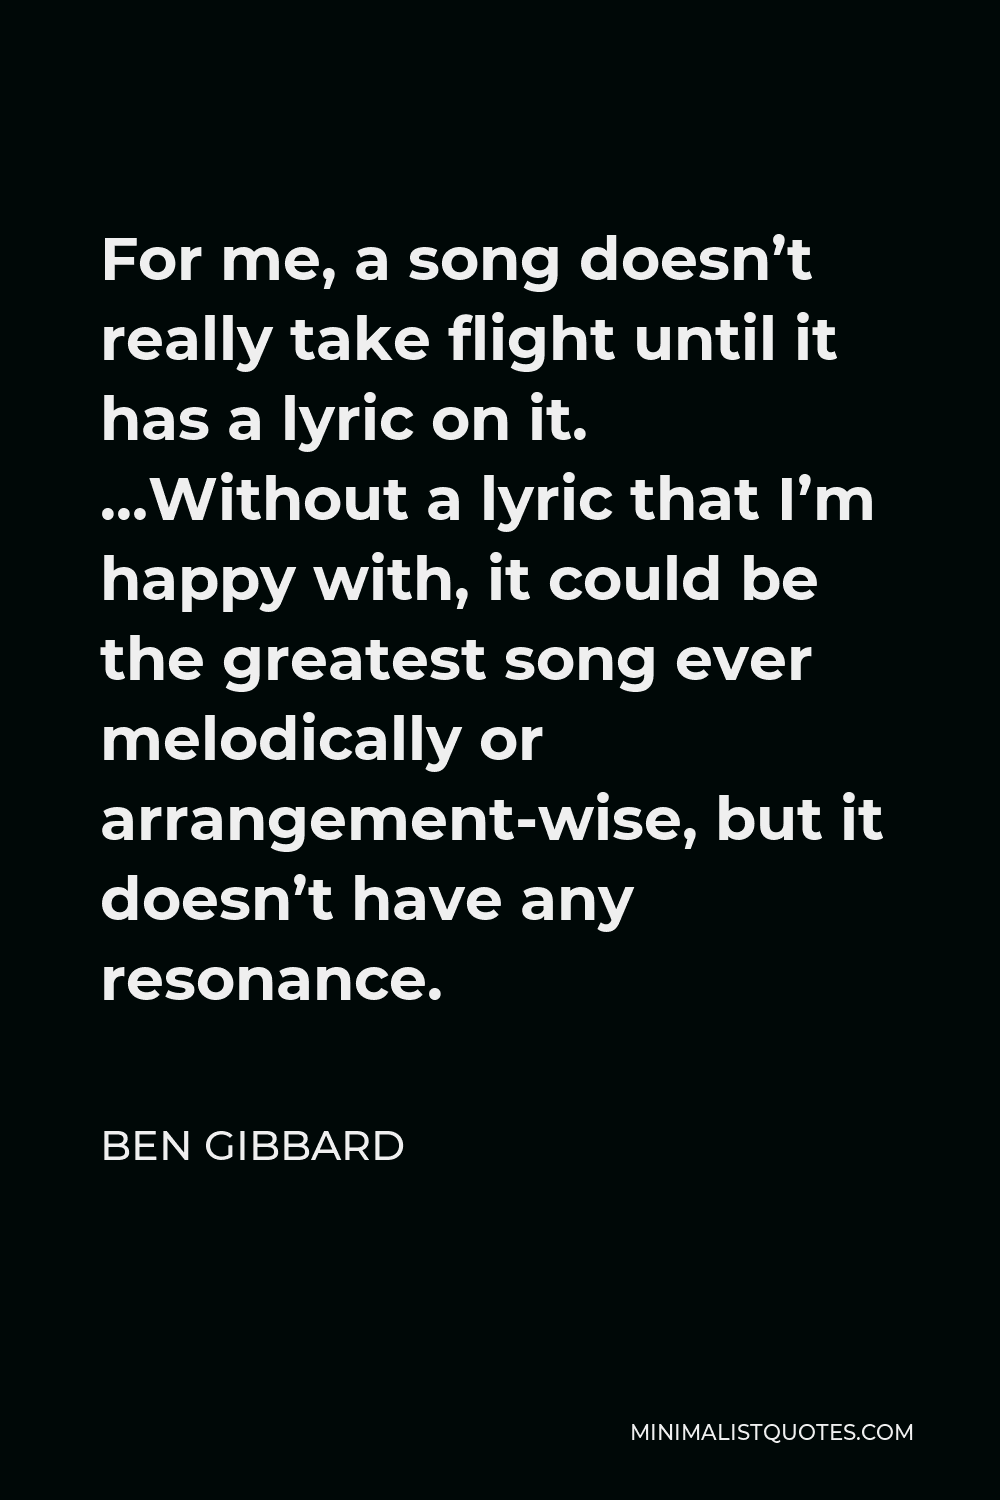 Ben Gibbard Quote - For me, a song doesn’t really take flight until it has a lyric on it. …Without a lyric that I’m happy with, it could be the greatest song ever melodically or arrangement-wise, but it doesn’t have any resonance.